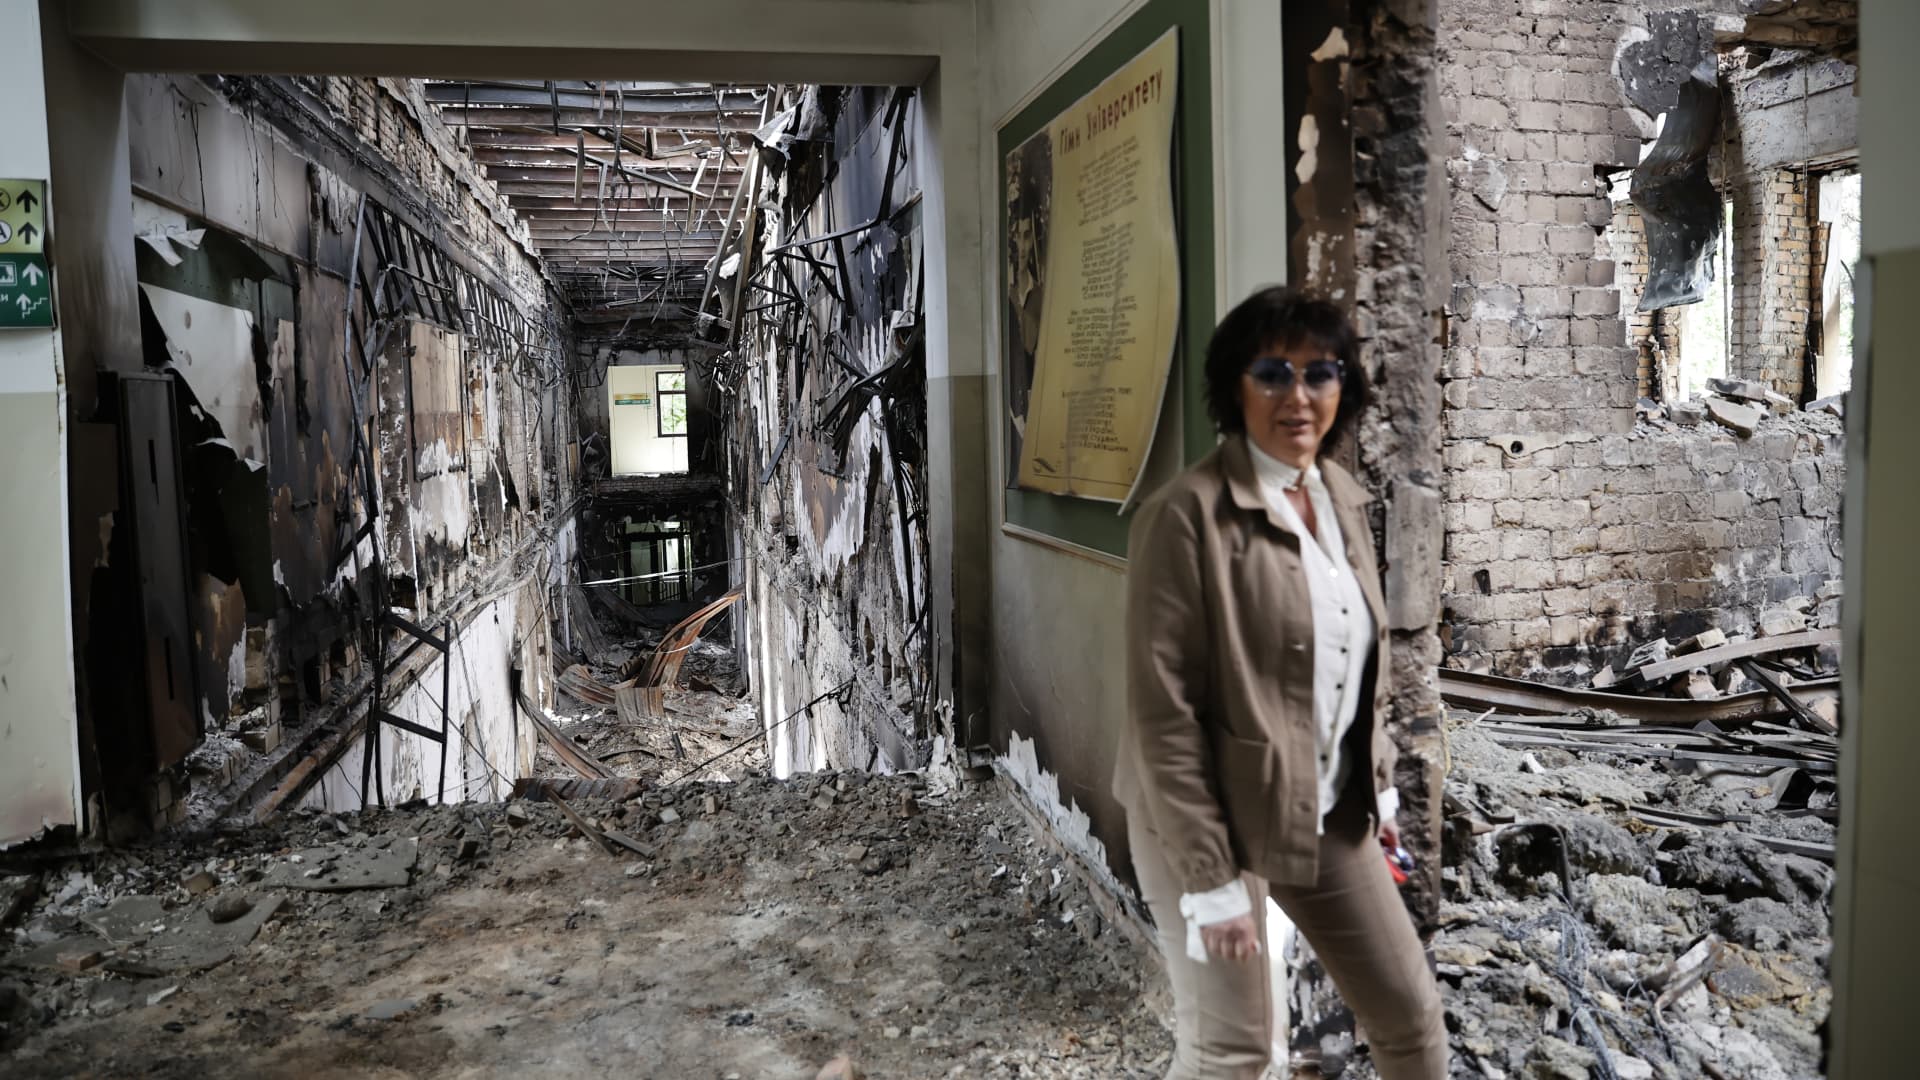 A view of destroyed State Tax University, which was used as shelter by civilians during Russian attacks, in Irpin, Ukraine on May 25, 2022.